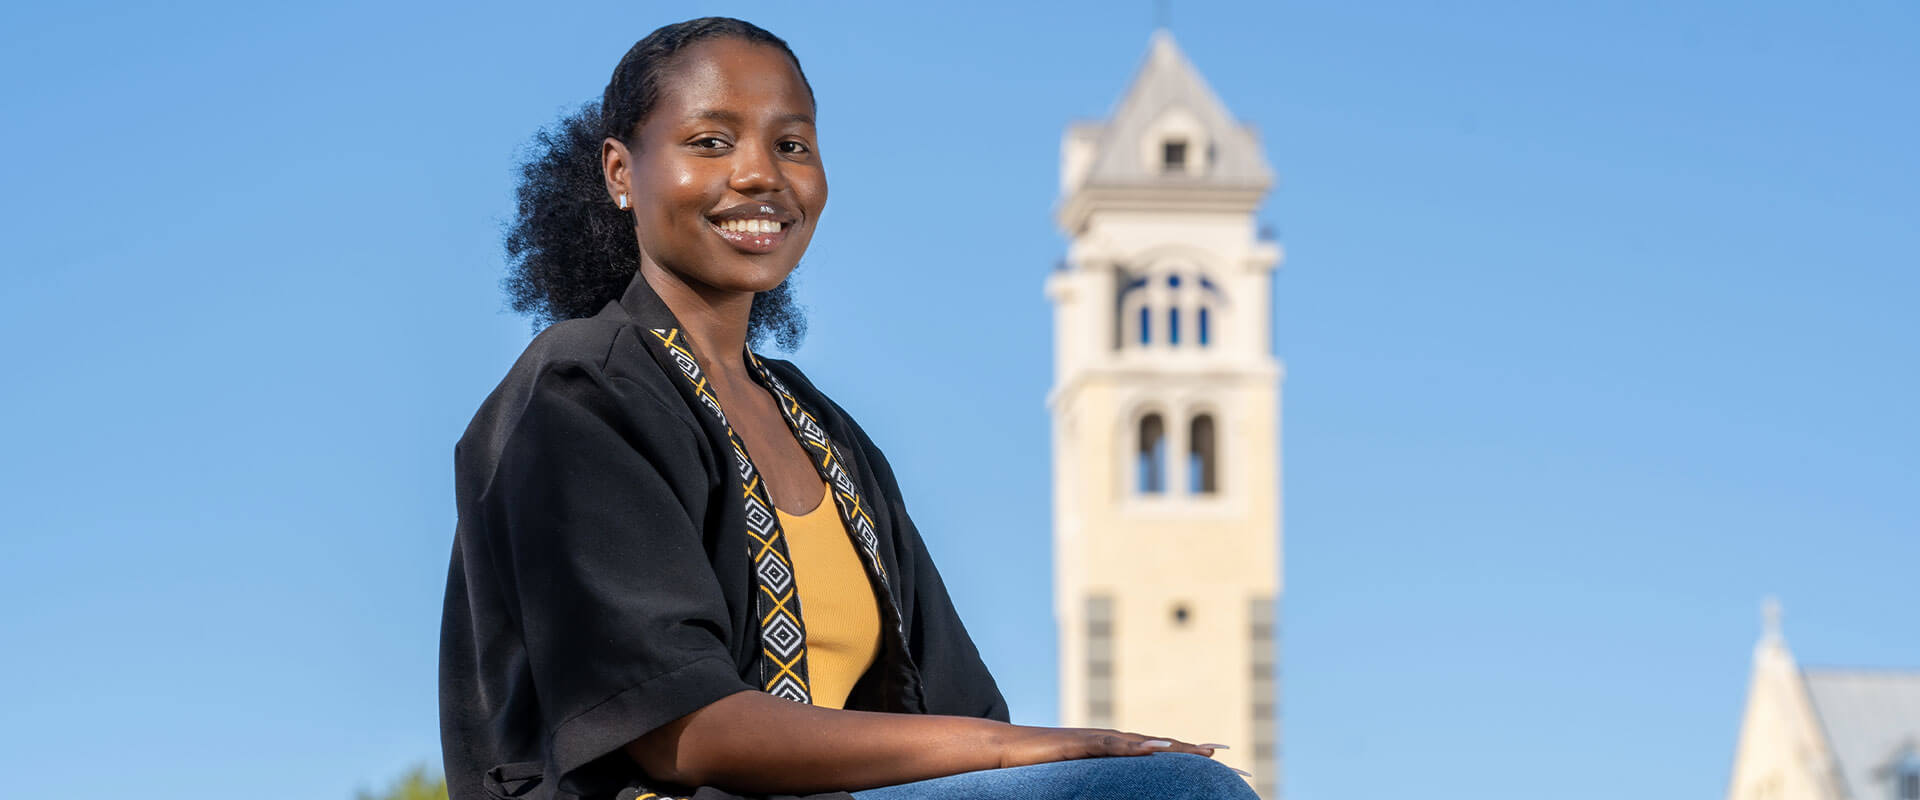 Christine Nduhura sits in front of the Bell Tower